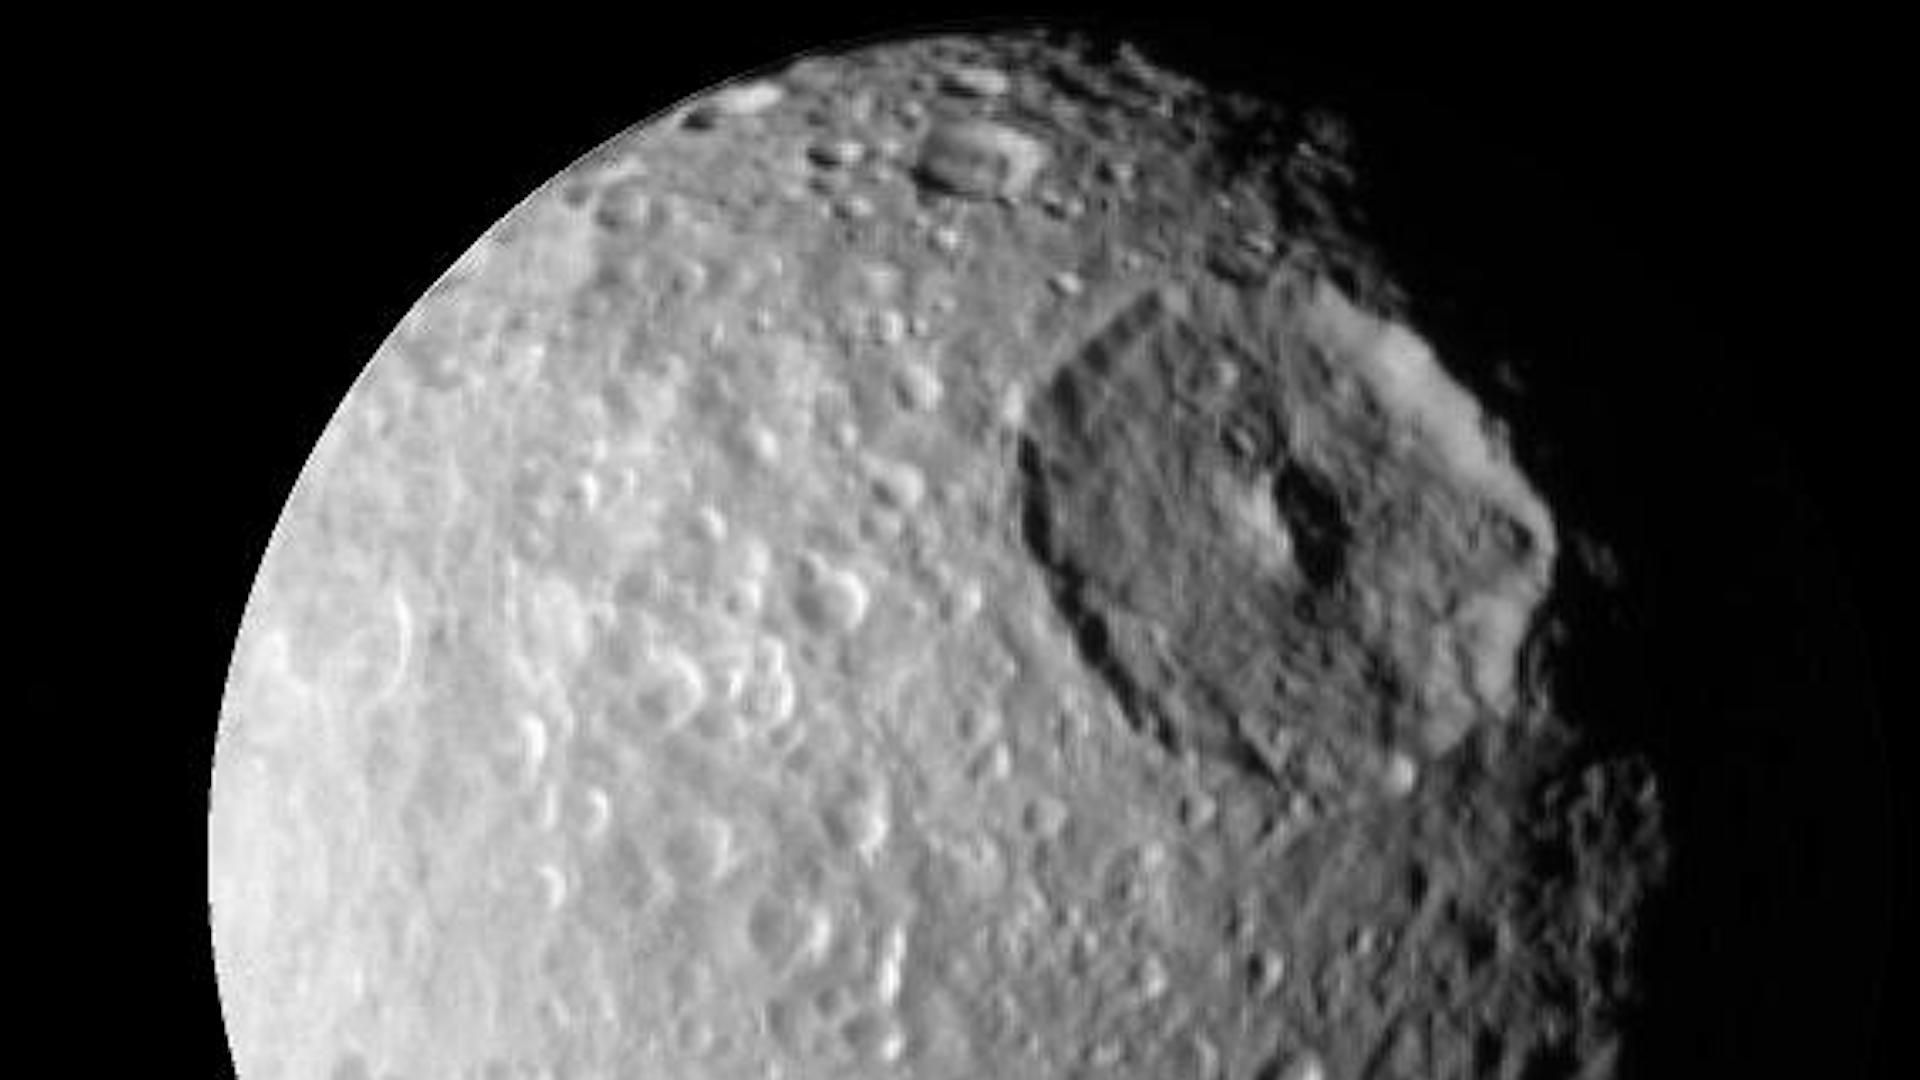 Mimas looking like the Death Star. Photo: NASA/JPL/Space Science Institute